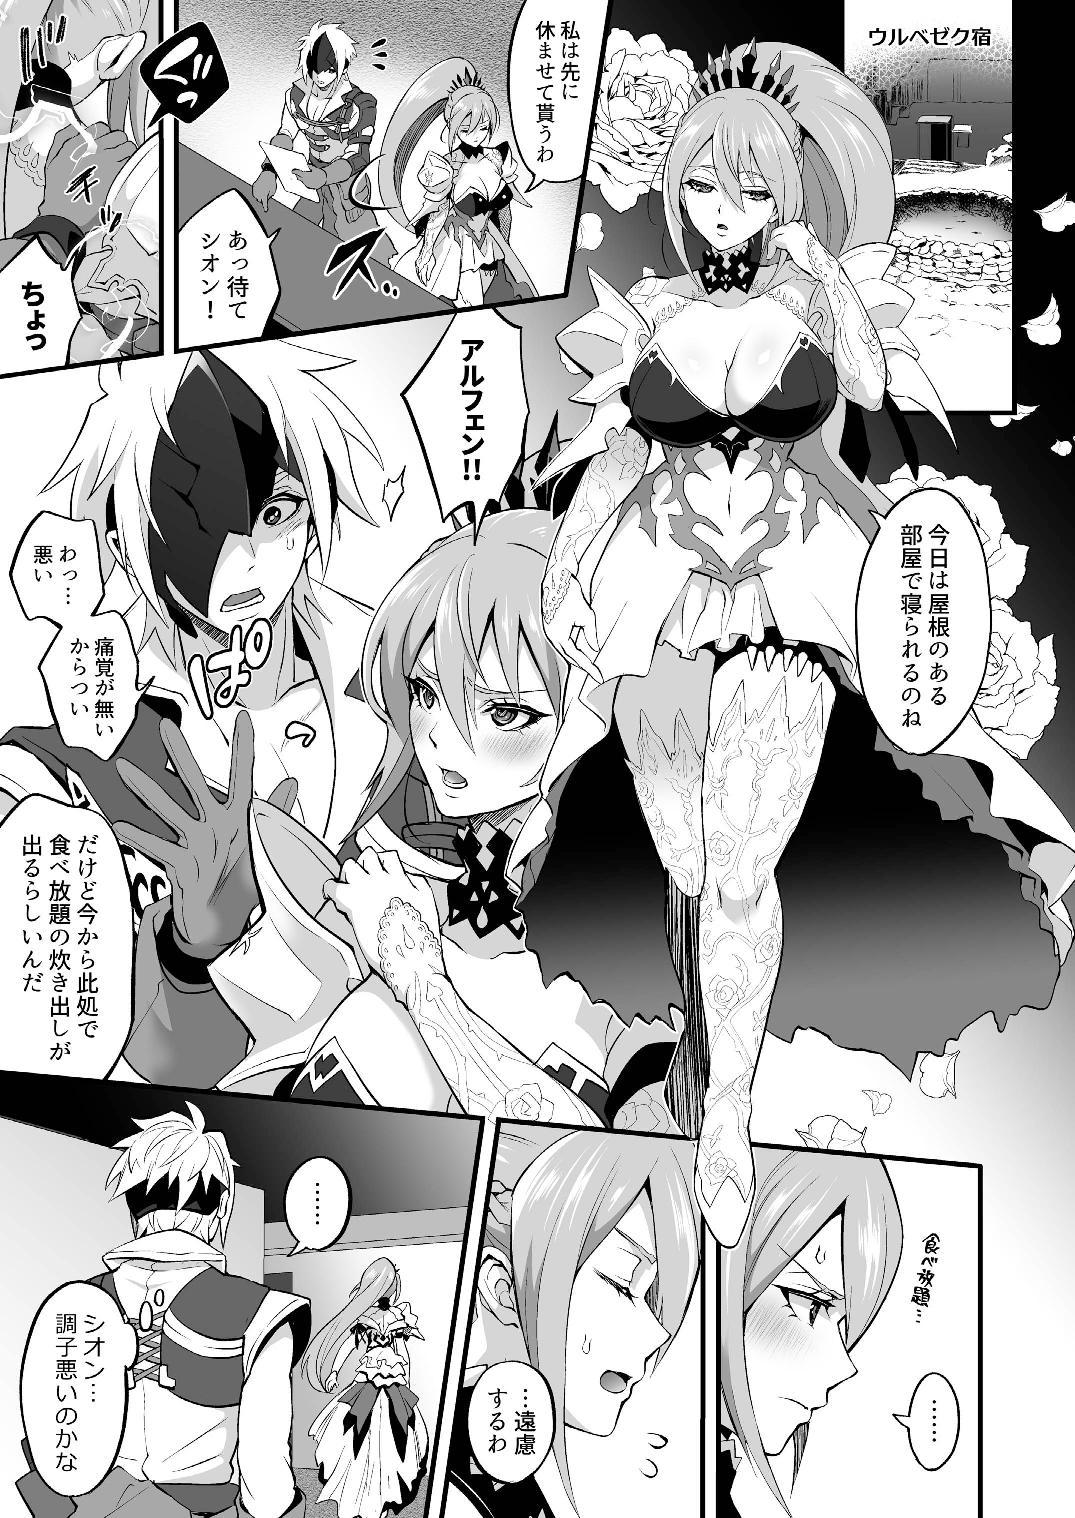 Asiansex 私に詰め寄ると〇〇〇がイくわよ…! - Tales of arise Playing - Page 3